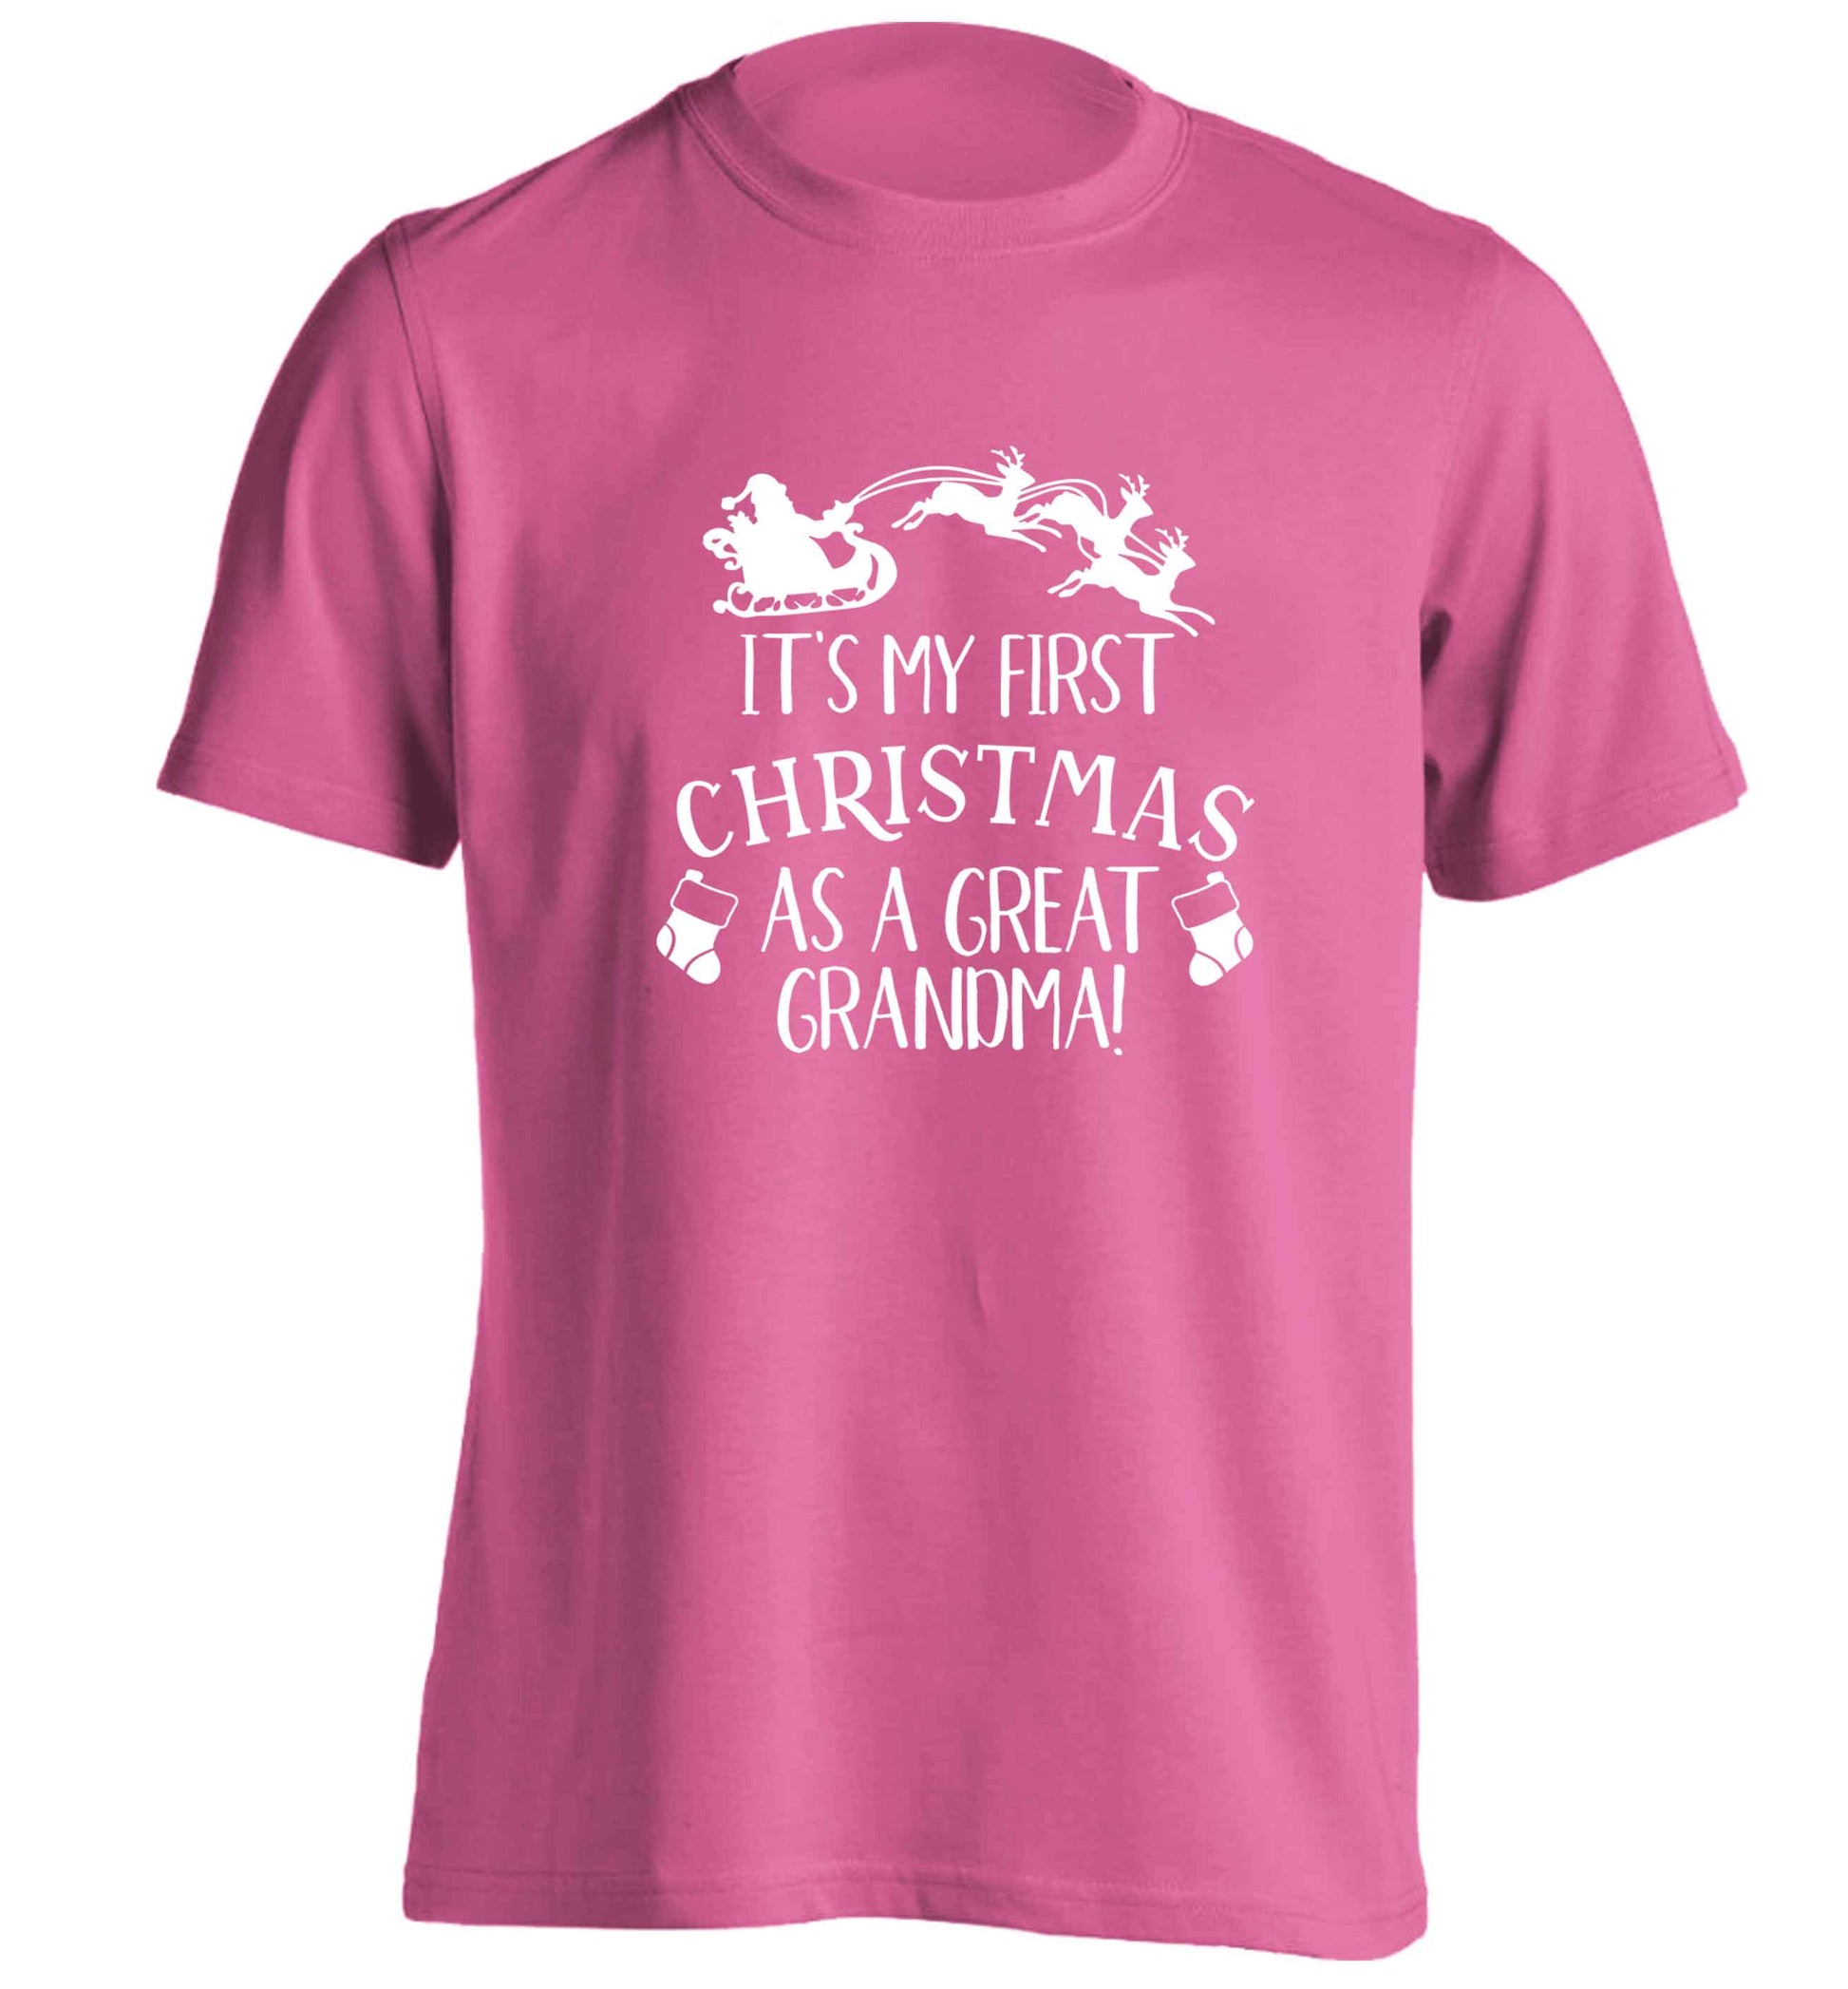 It's my first Christmas as a great grandma! adults unisex pink Tshirt 2XL